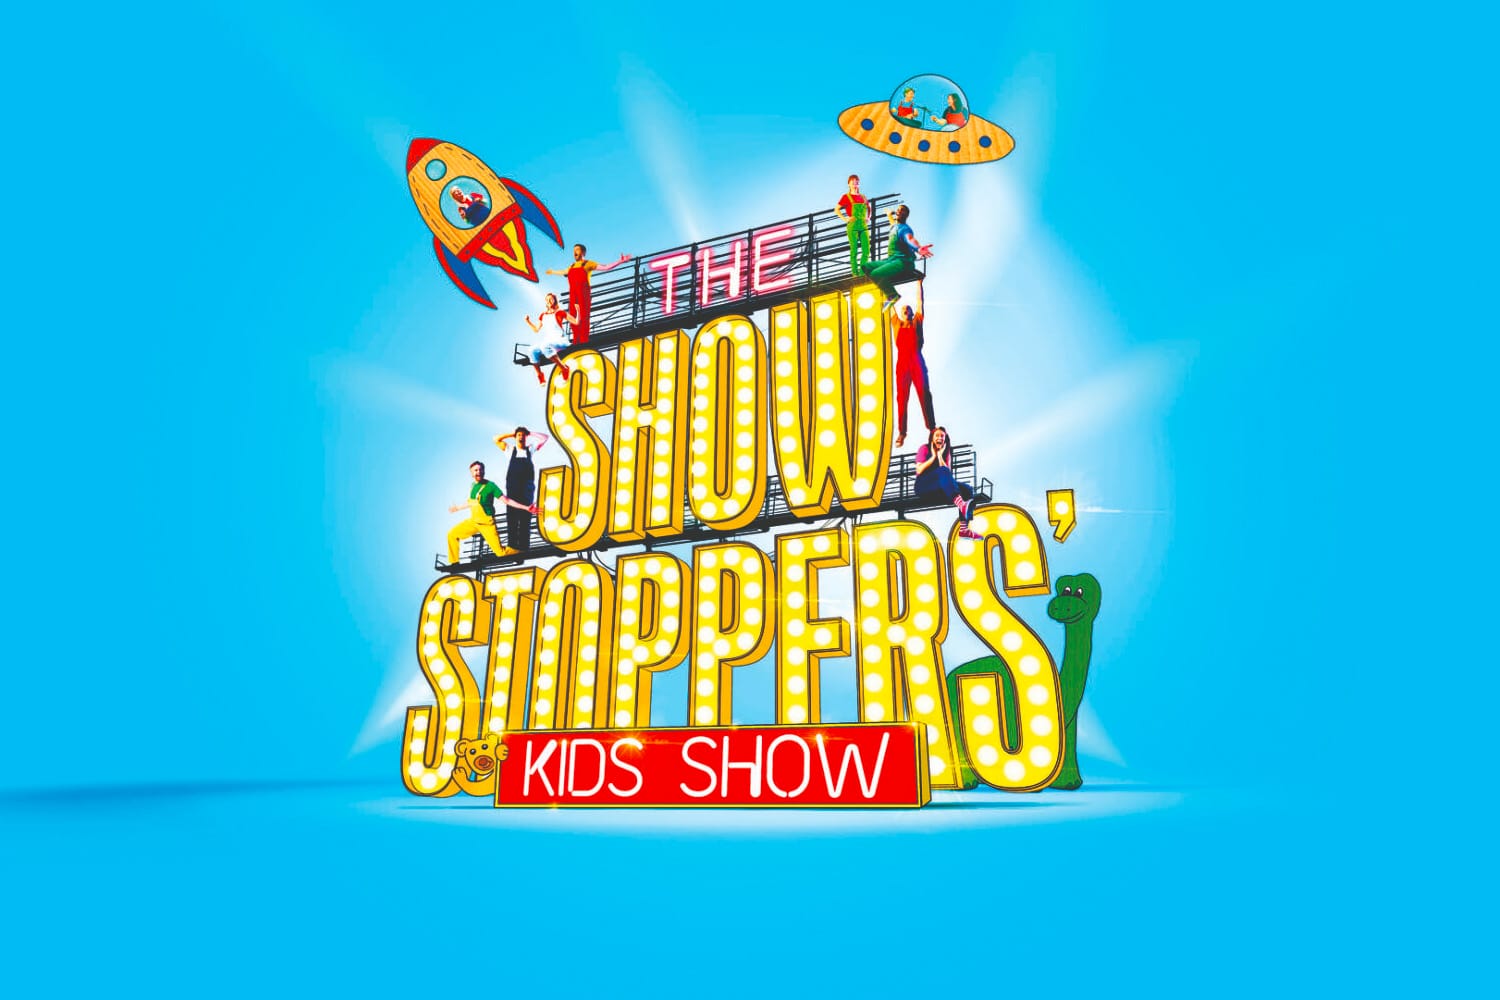 Dynamic typography reads: The Show Stoppers Kids' Show against a bright blue background. Flying out from the text in the centre are rocket ships, flying saucers, dinosaurs and more.